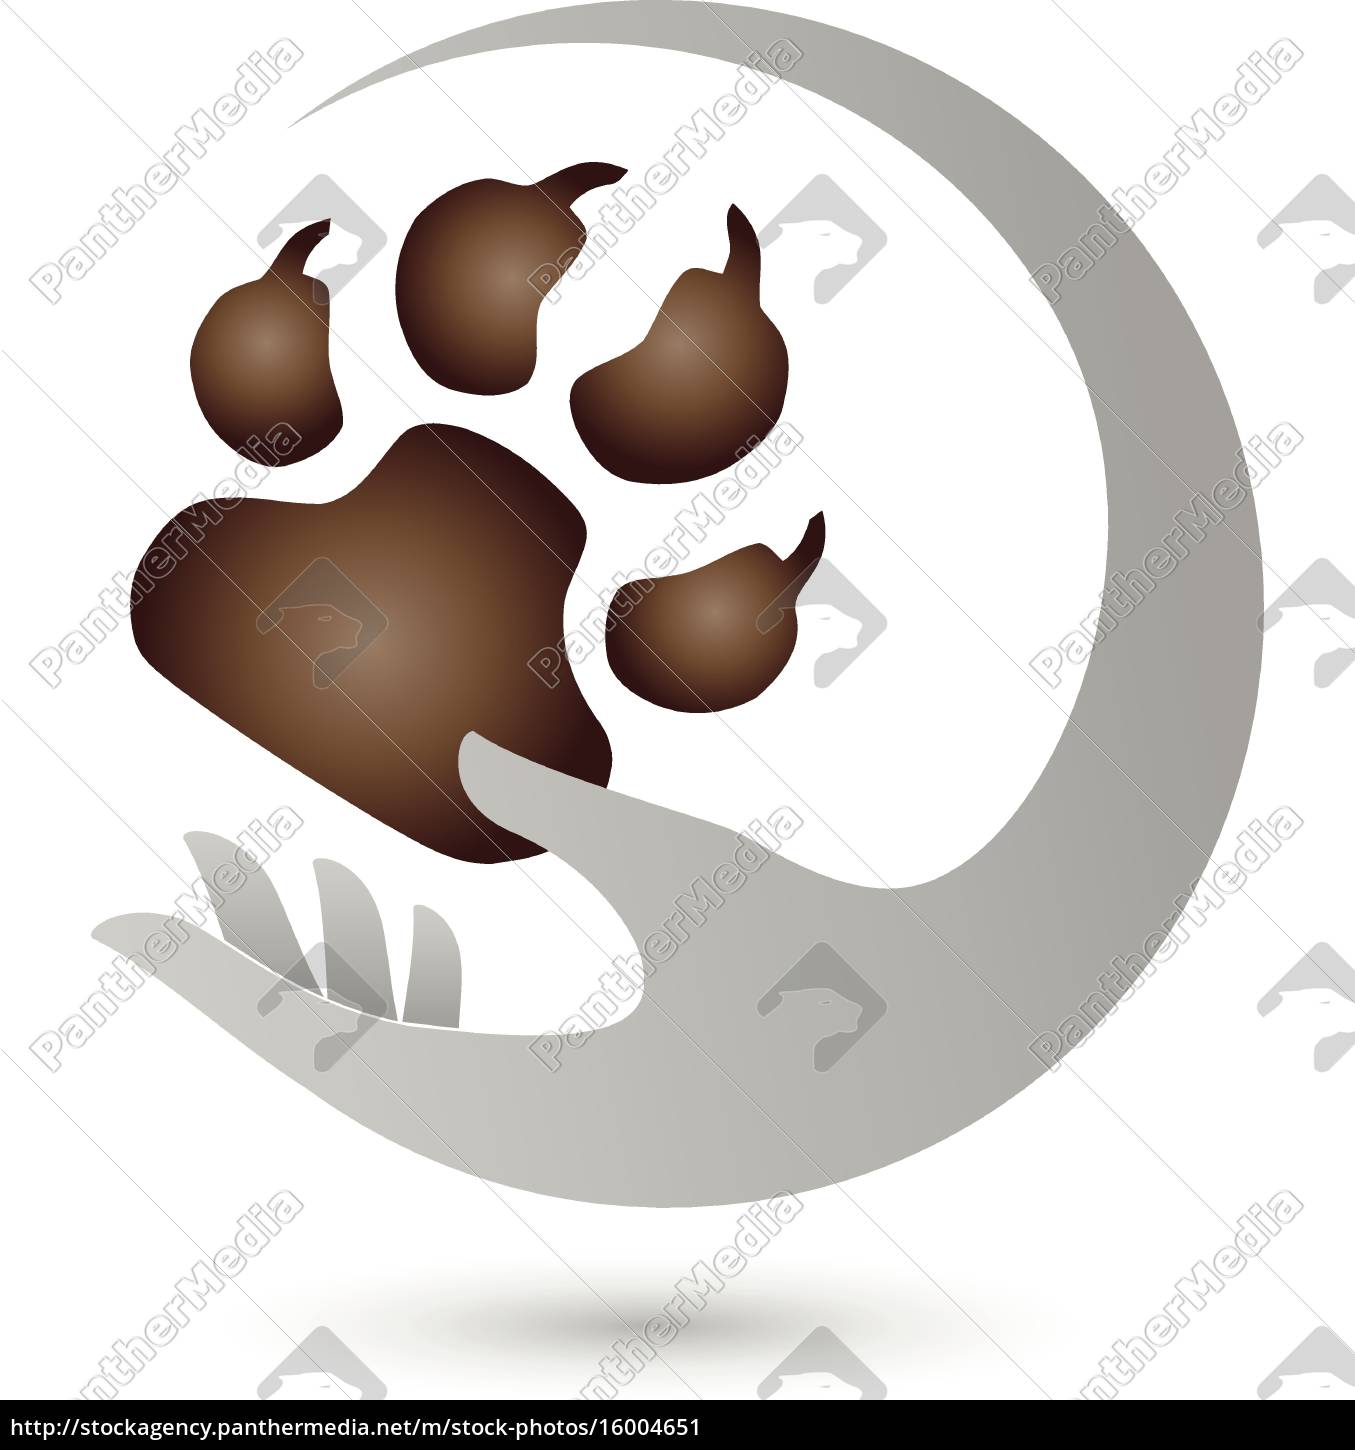 Hand and Paw Dogs Logo - Stock Photo - #16004651 | PantherMedia Stock